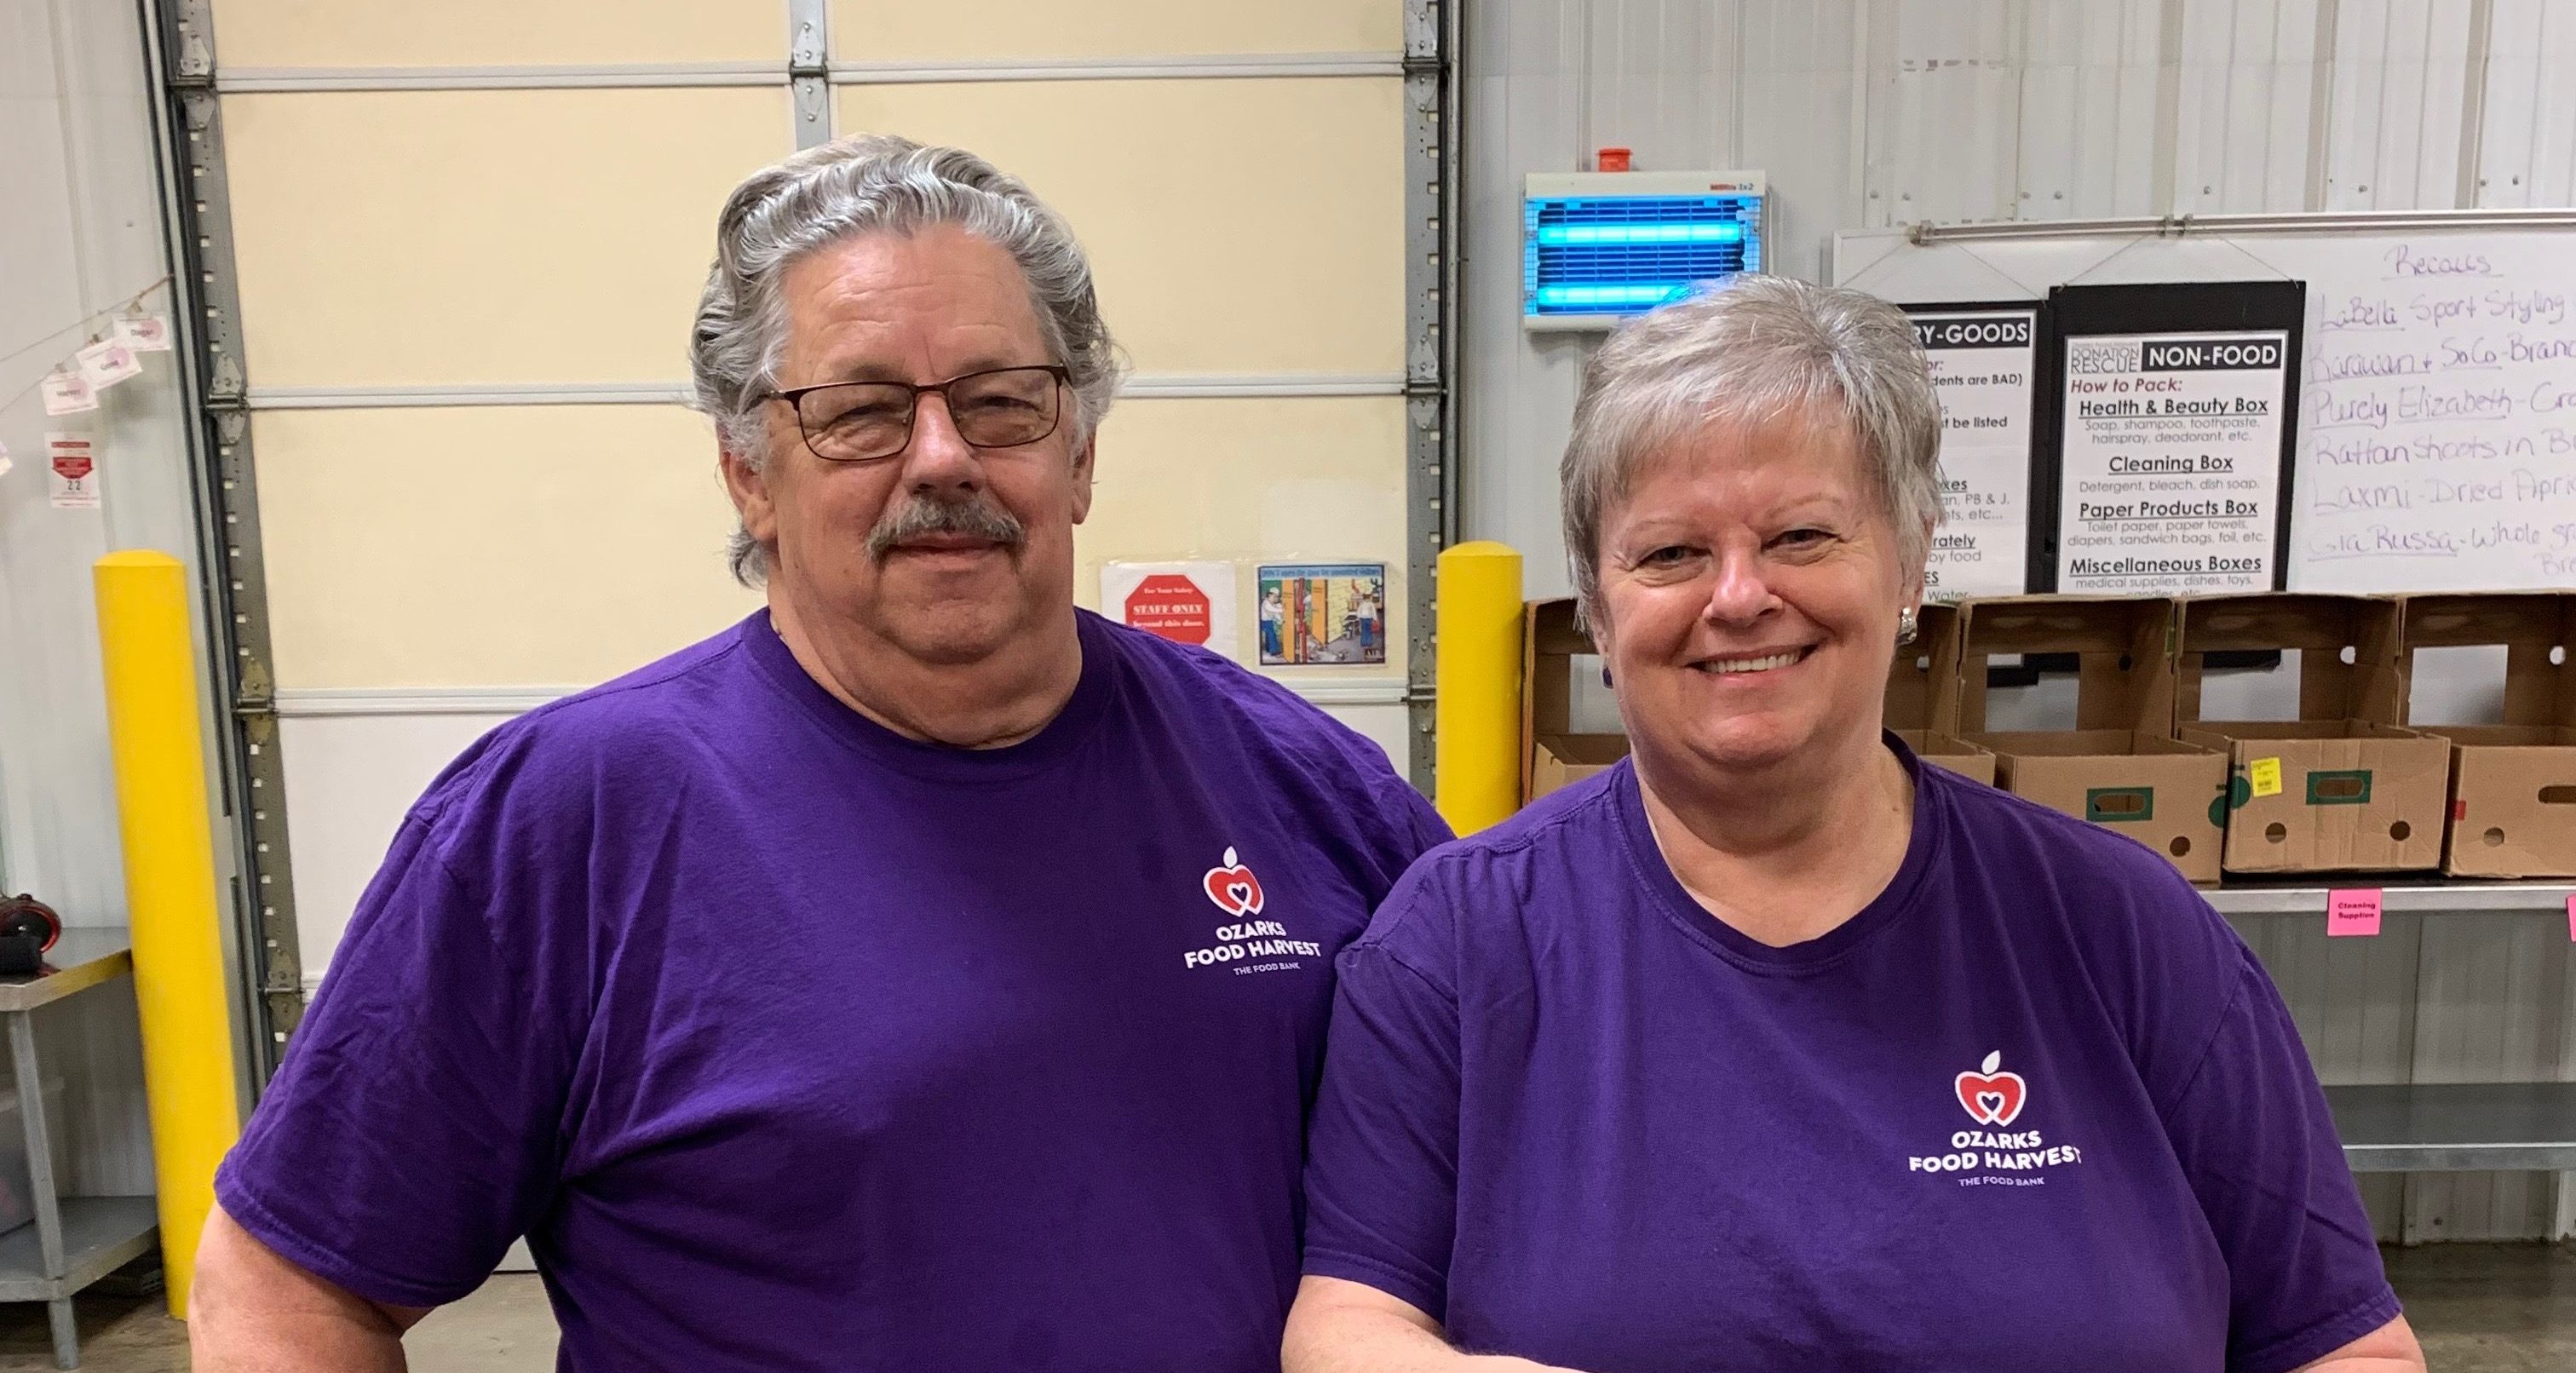 Couple Reaches 1,000 Hours of volunteer time